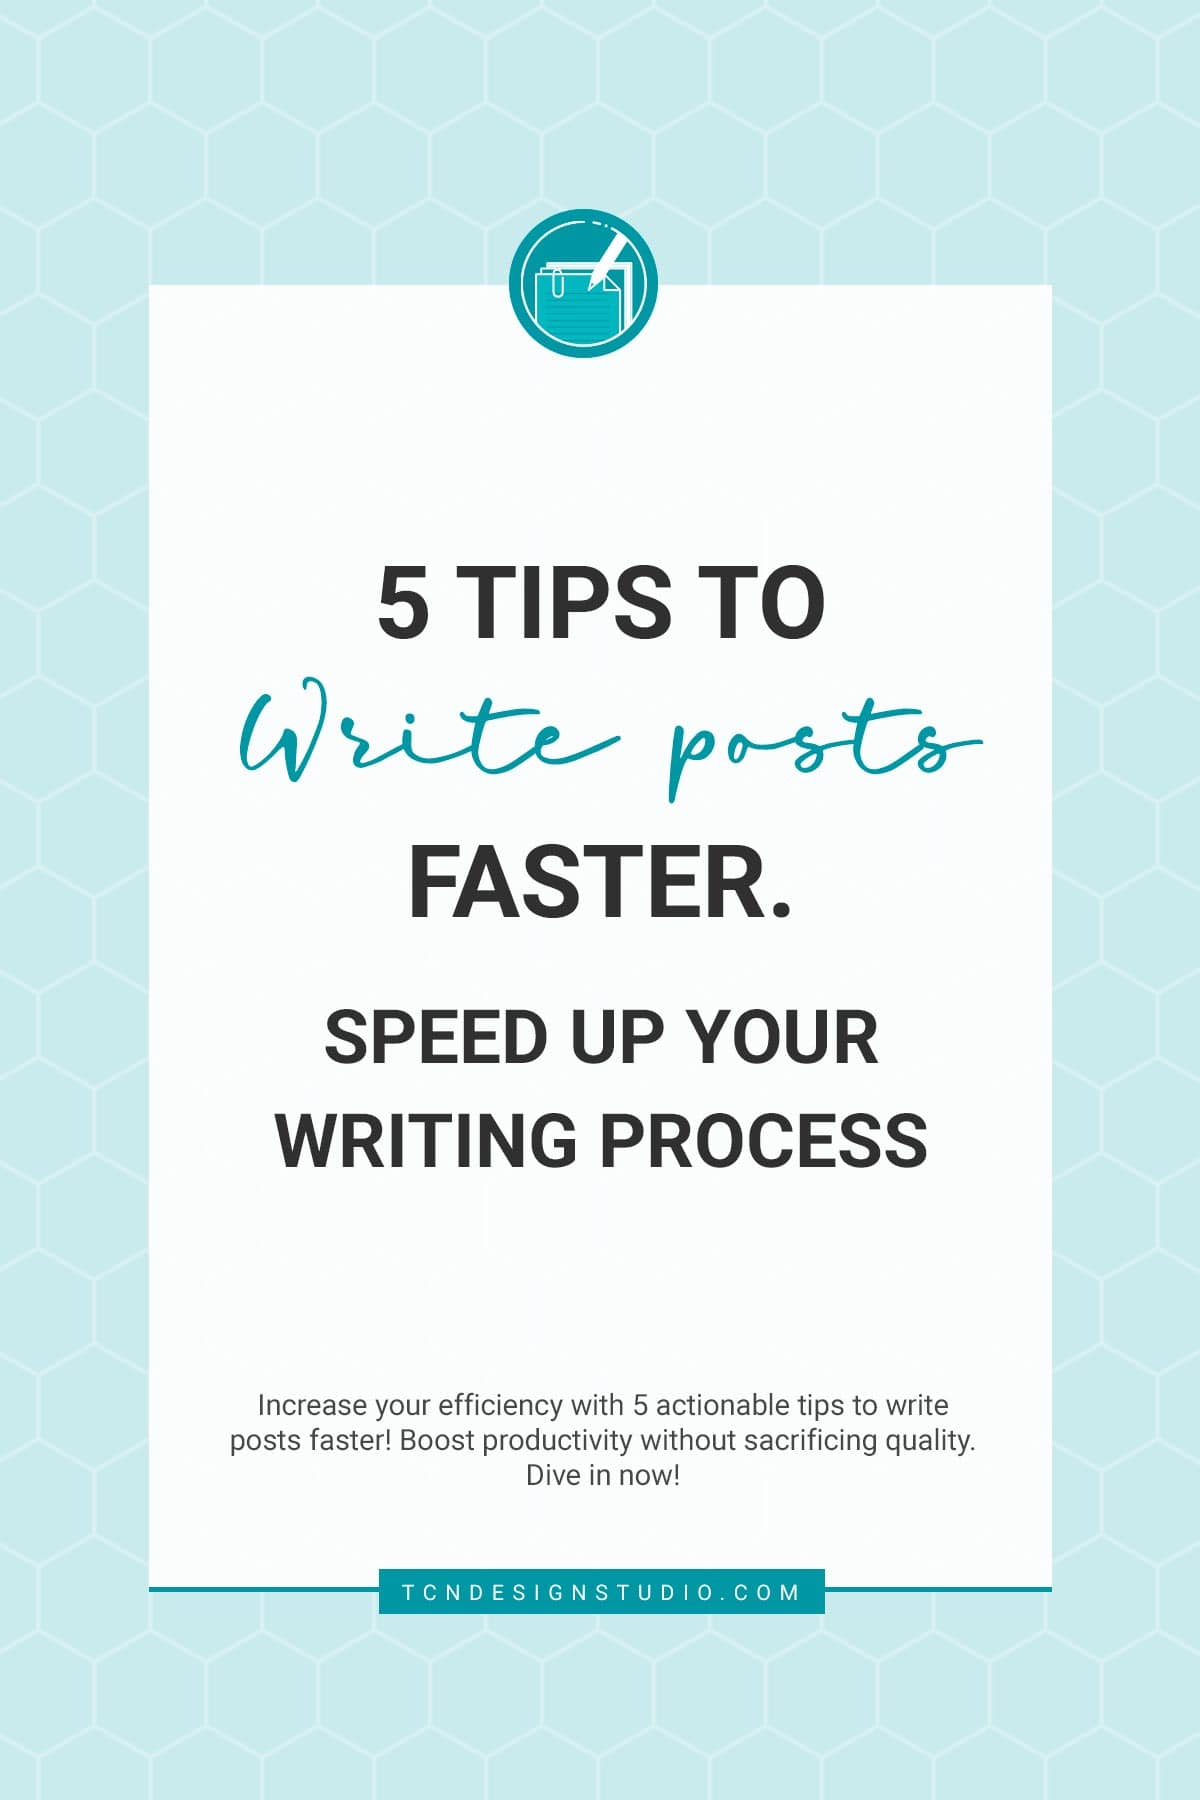 5 Tips to Write Posts Faster. Speed Up Your Writing Process cover image solid color with title text overlay